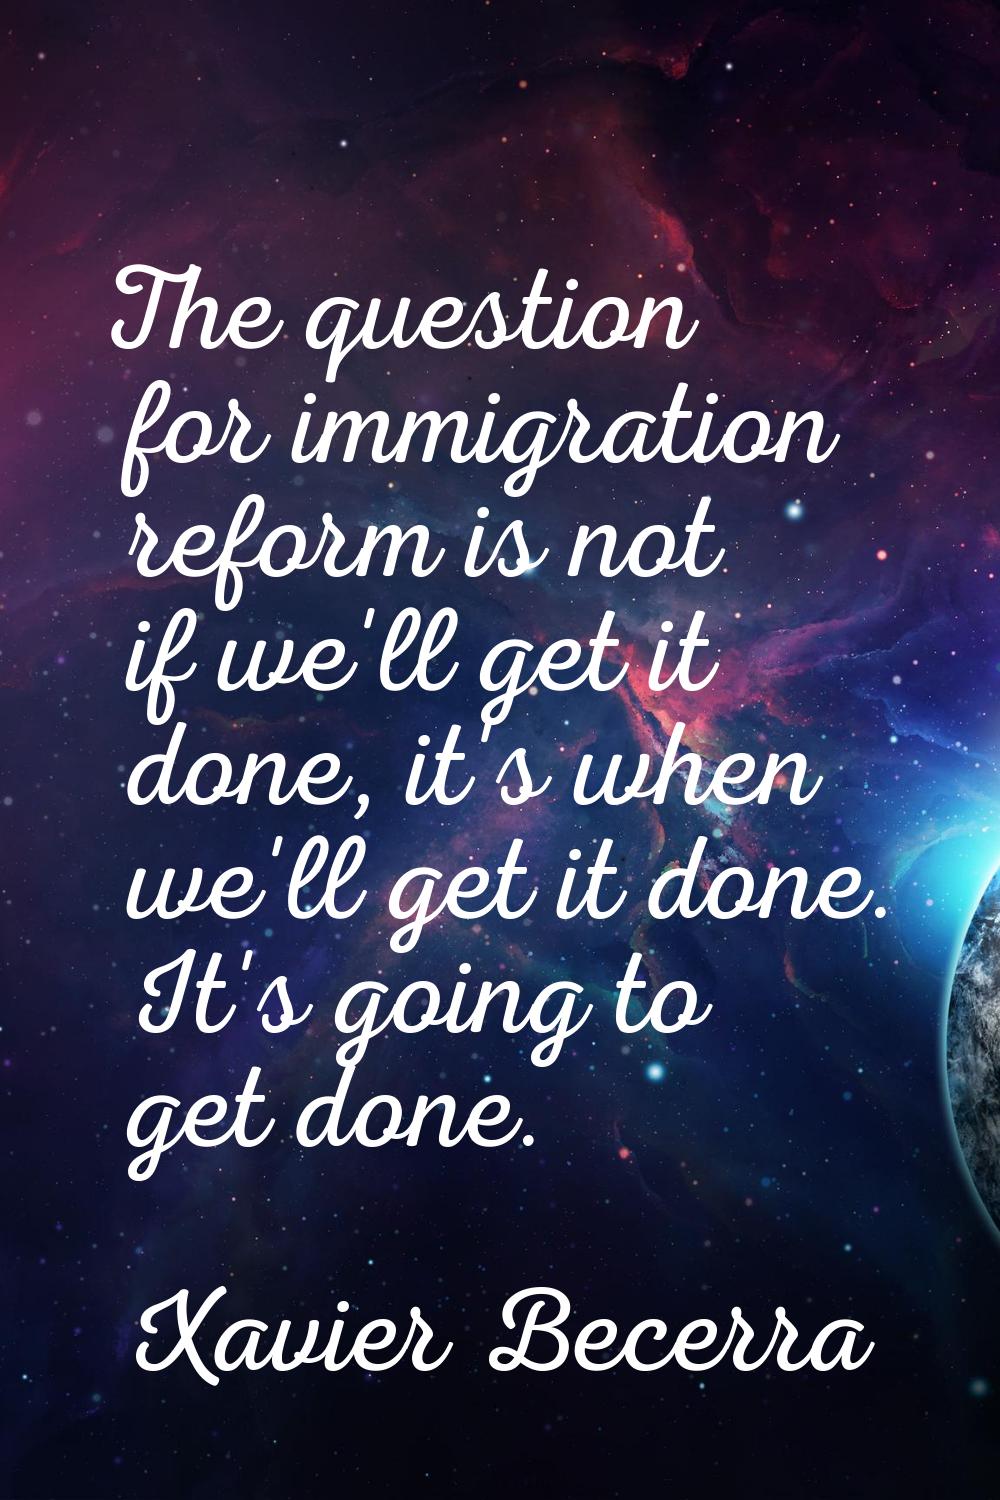 The question for immigration reform is not if we'll get it done, it's when we'll get it done. It's 